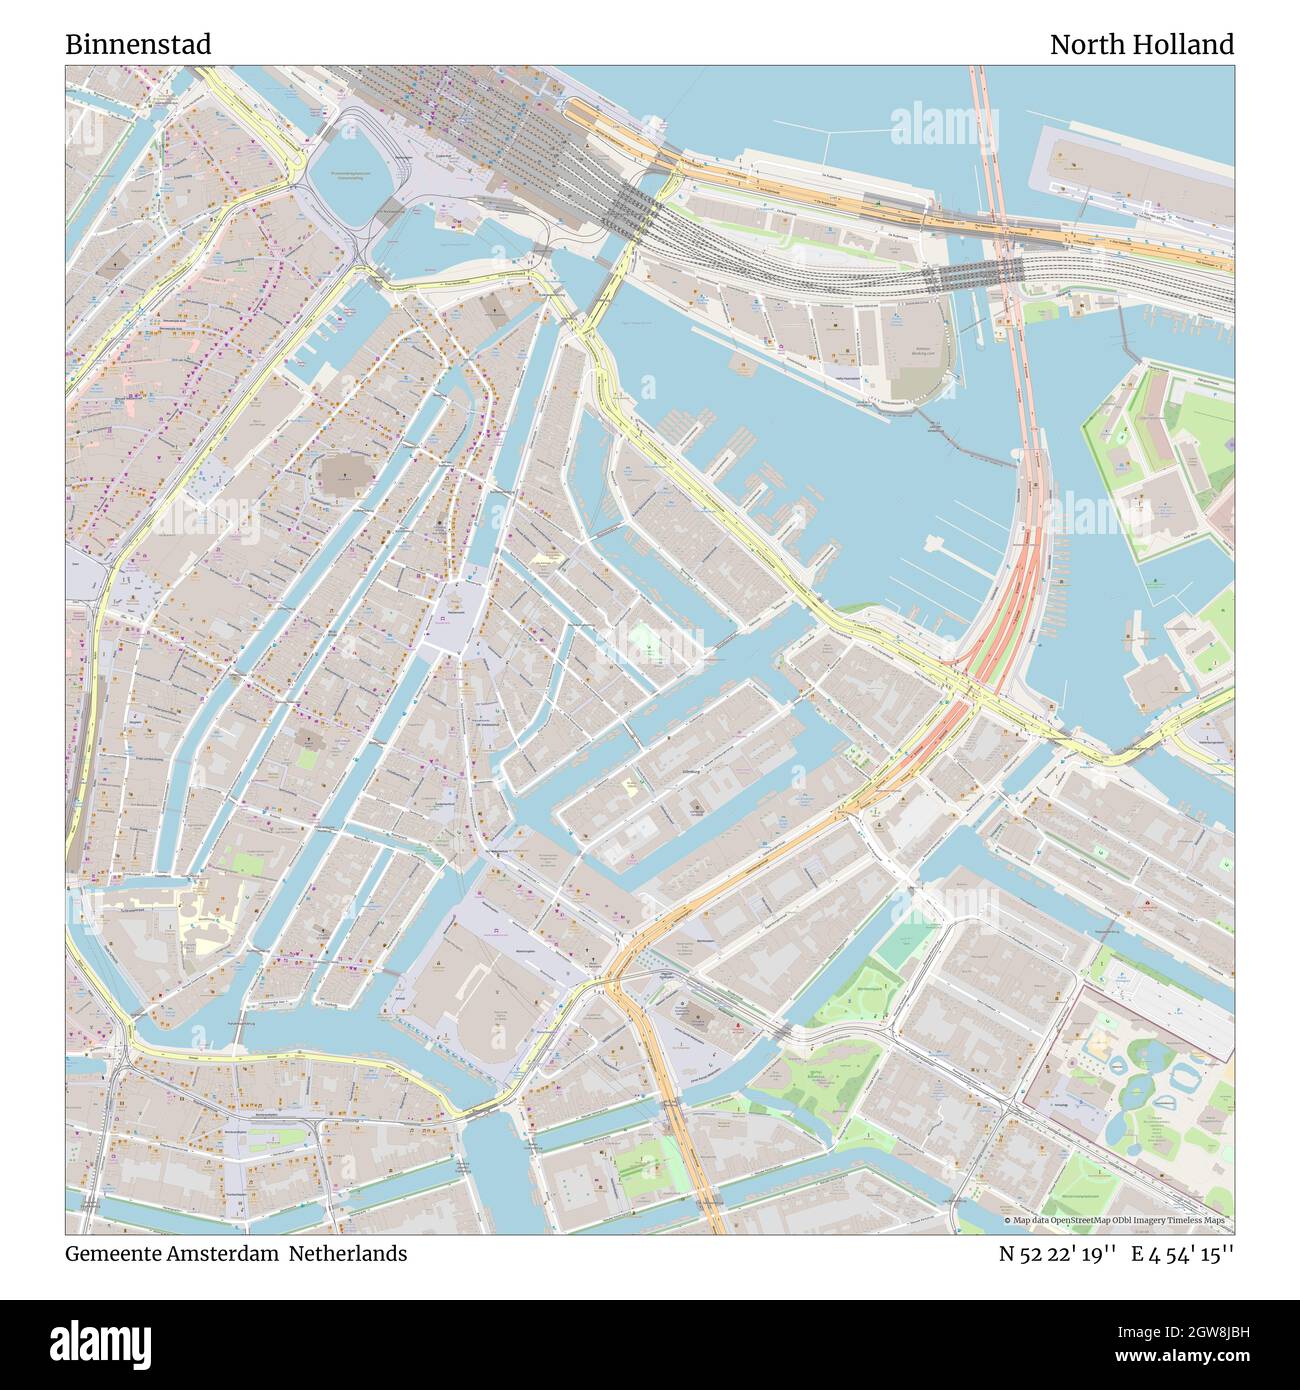 Binnenstad, Gemeente Amsterdam, Netherlands, North Holland, N 52 22' 19'', E 4 54' 15'', map, Timeless Map published in 2021. Travelers, explorers and adventurers like Florence Nightingale, David Livingstone, Ernest Shackleton, Lewis and Clark and Sherlock Holmes relied on maps to plan travels to the world's most remote corners, Timeless Maps is mapping most locations on the globe, showing the achievement of great dreams Stock Photo